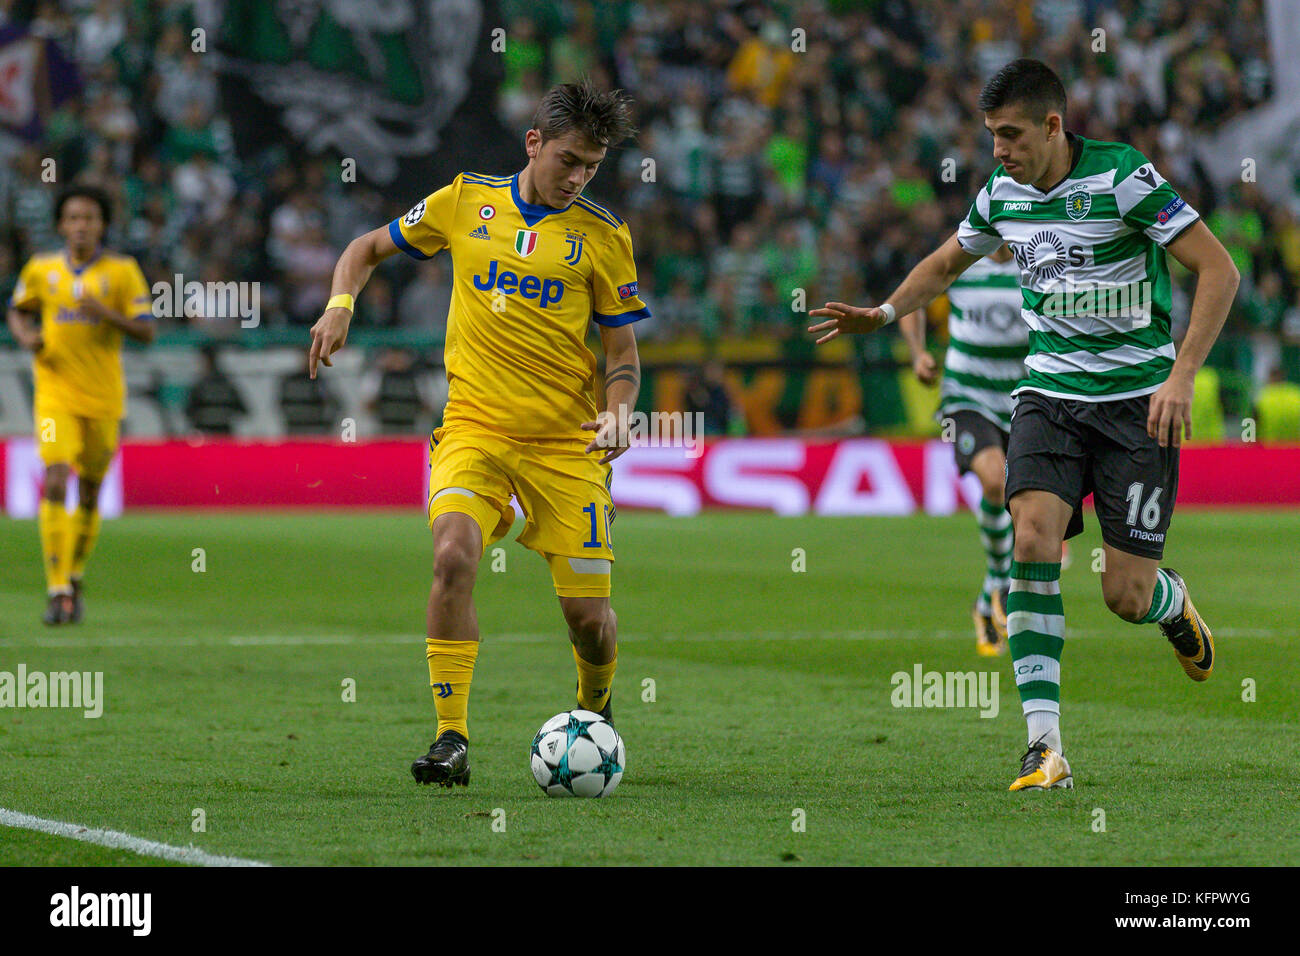 Lisbon, Portugal. 31st Oct, 2017. Juventus's forward from Argentina Paulo Dybala (10) during the game of the 4th round of the UEFA Champions League Group D, Sporting v Juventus Credit: Alexandre de Sousa/Alamy Live News Stock Photo